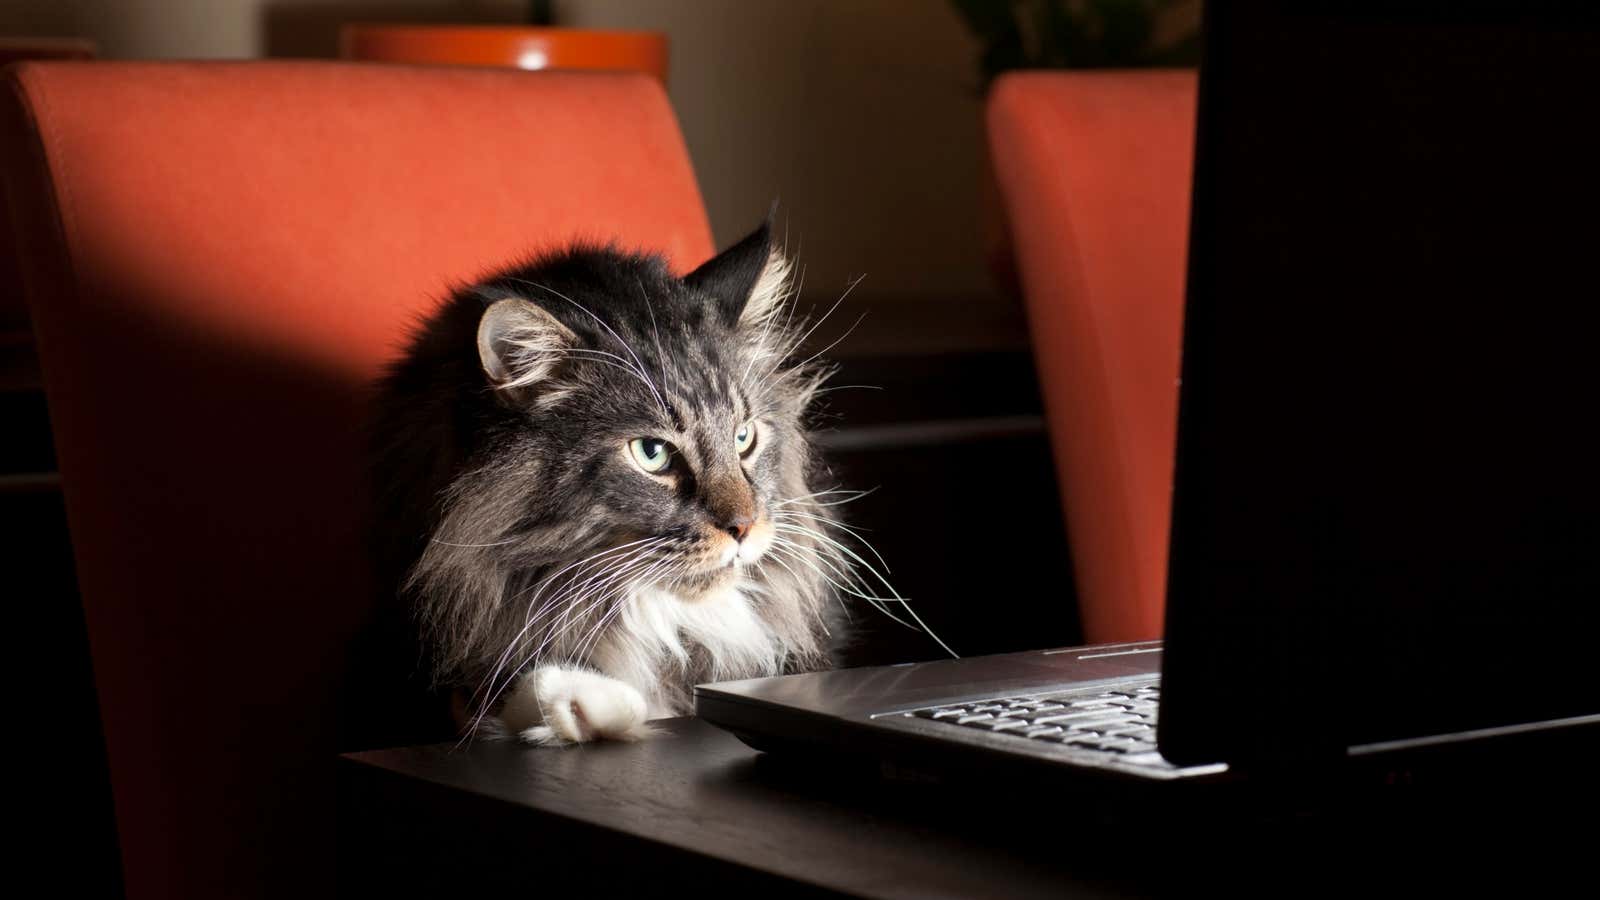 Intense concentration, or “flow,” can also be a sign of procrastination. Especially when looking at pictures of cats.